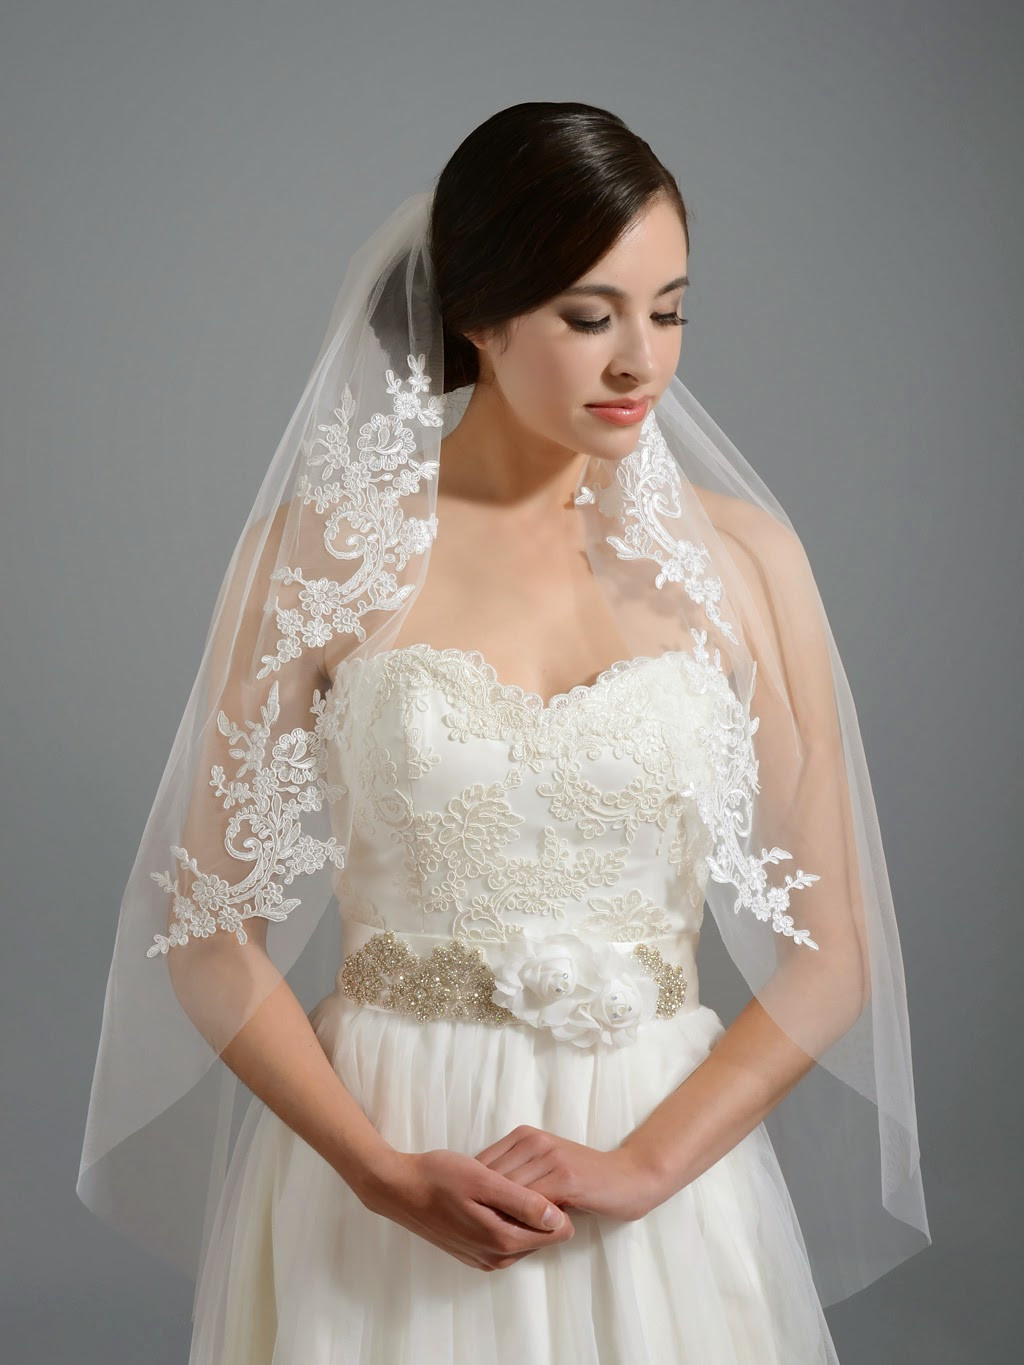 Images Of Wedding Veils
 Wedding Veil How to Select the Perfect e